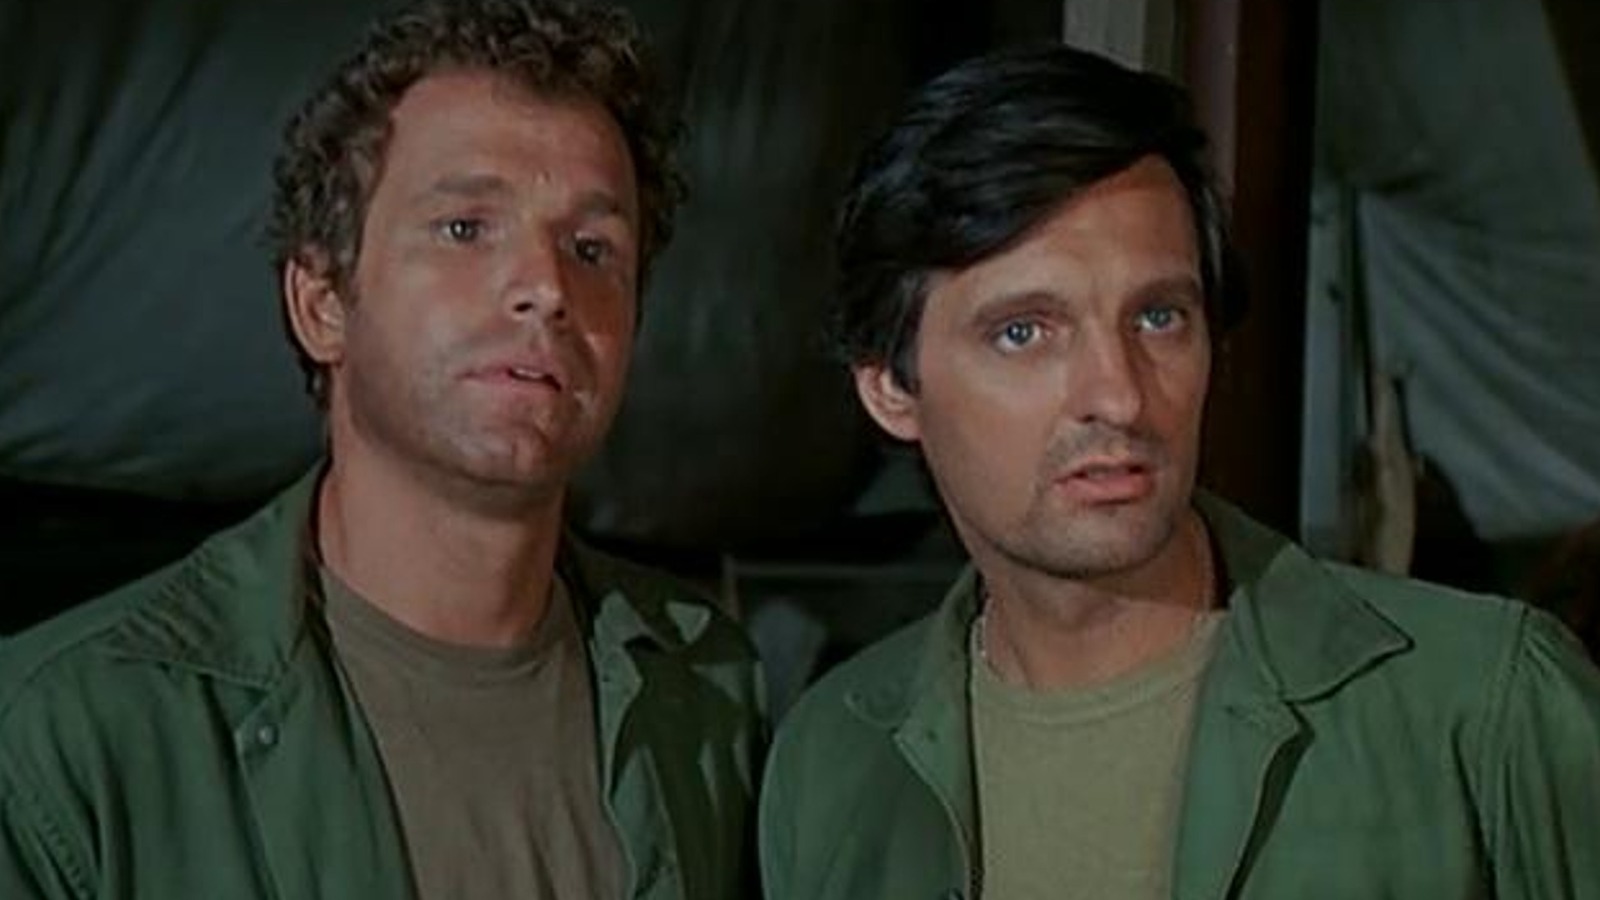 How M*A*S*H's Alan Alda Pushed For The Series To Be More Than A Comedy